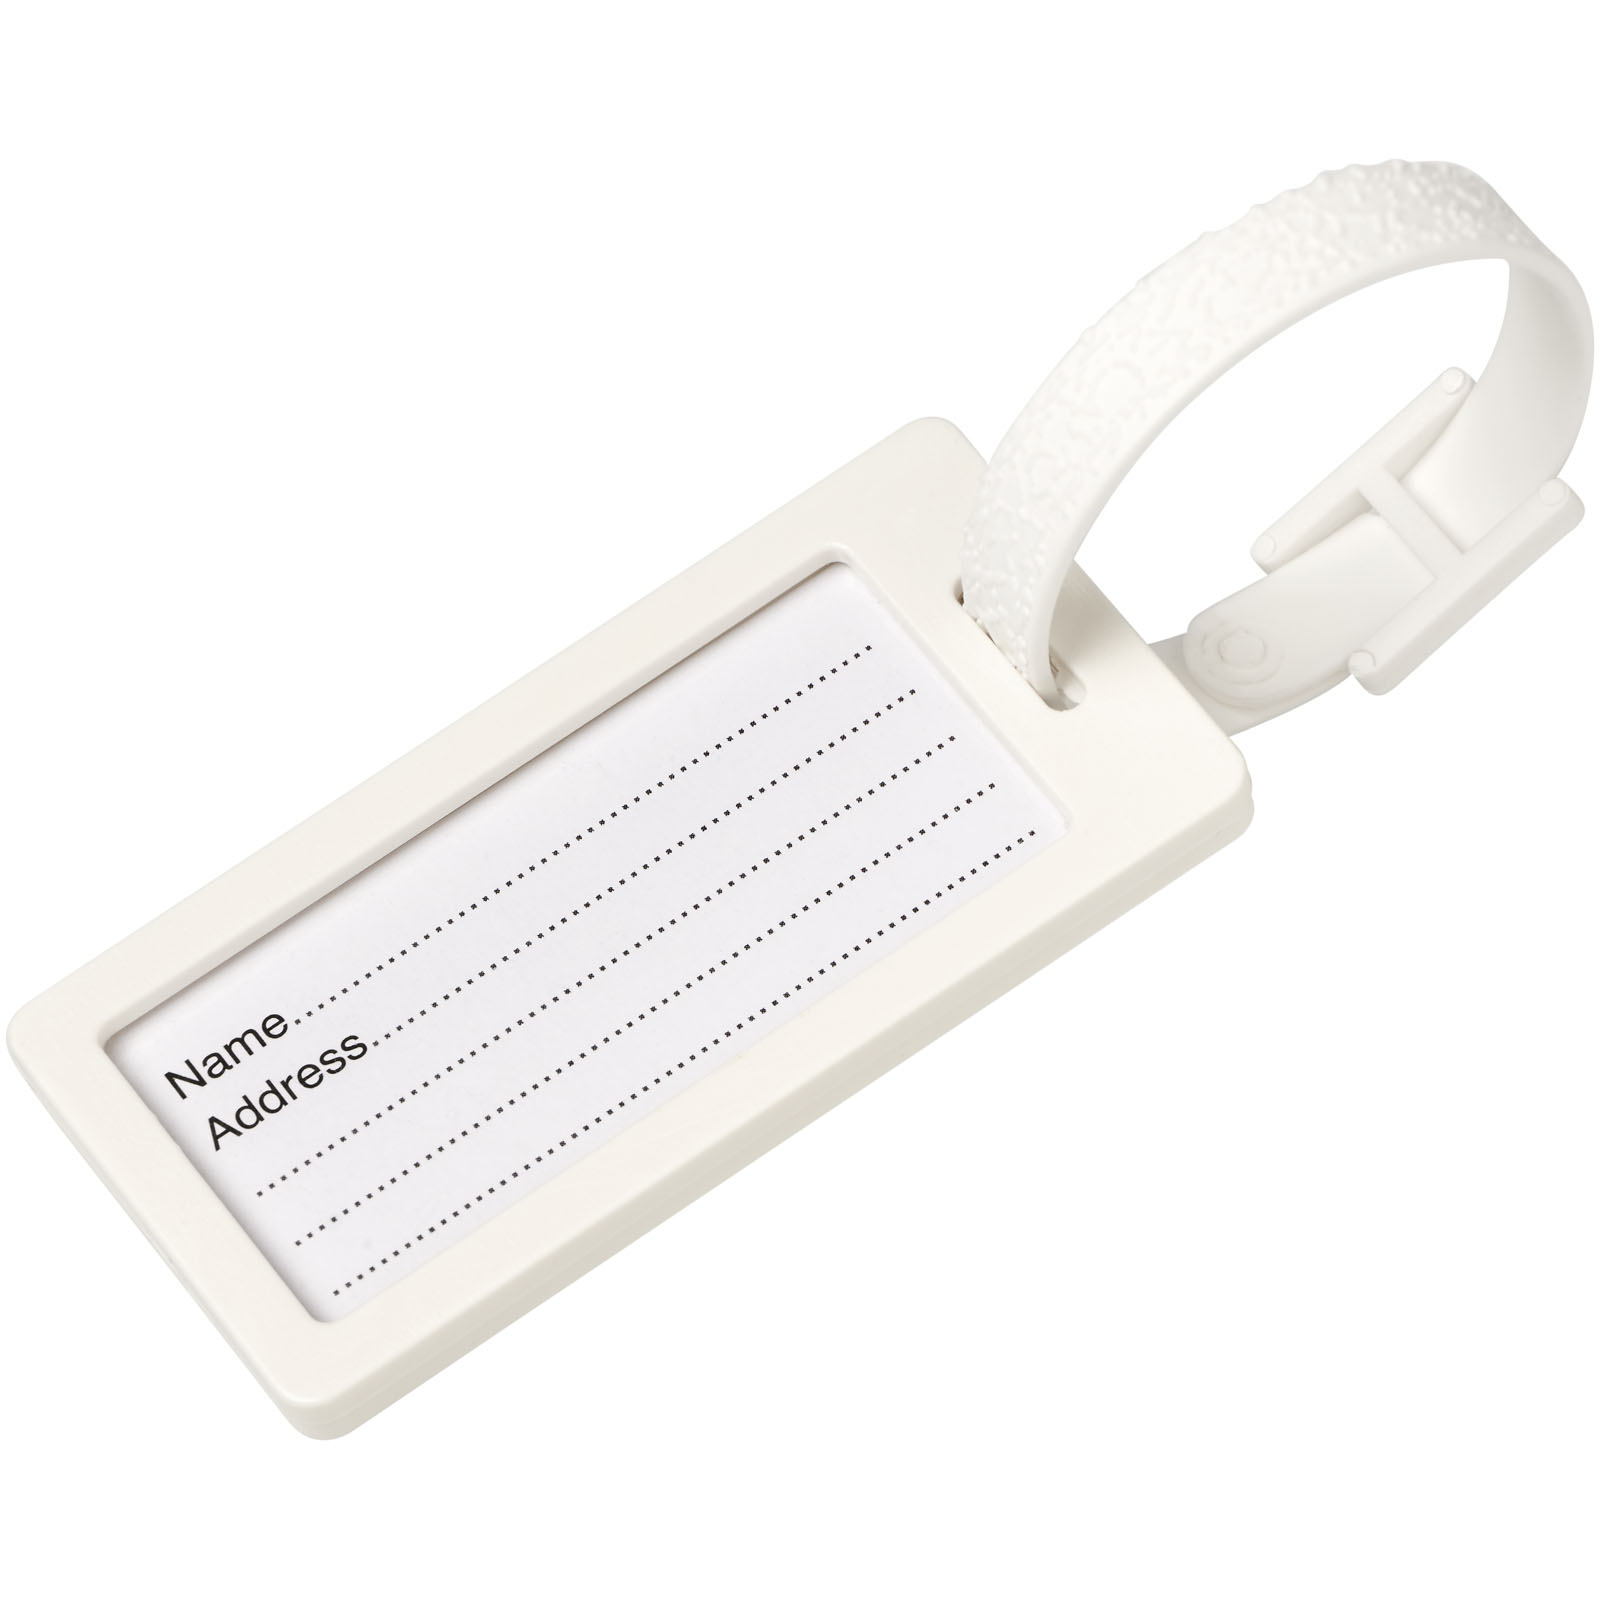 Advertising Travel Accessories - River recycled window luggage tag